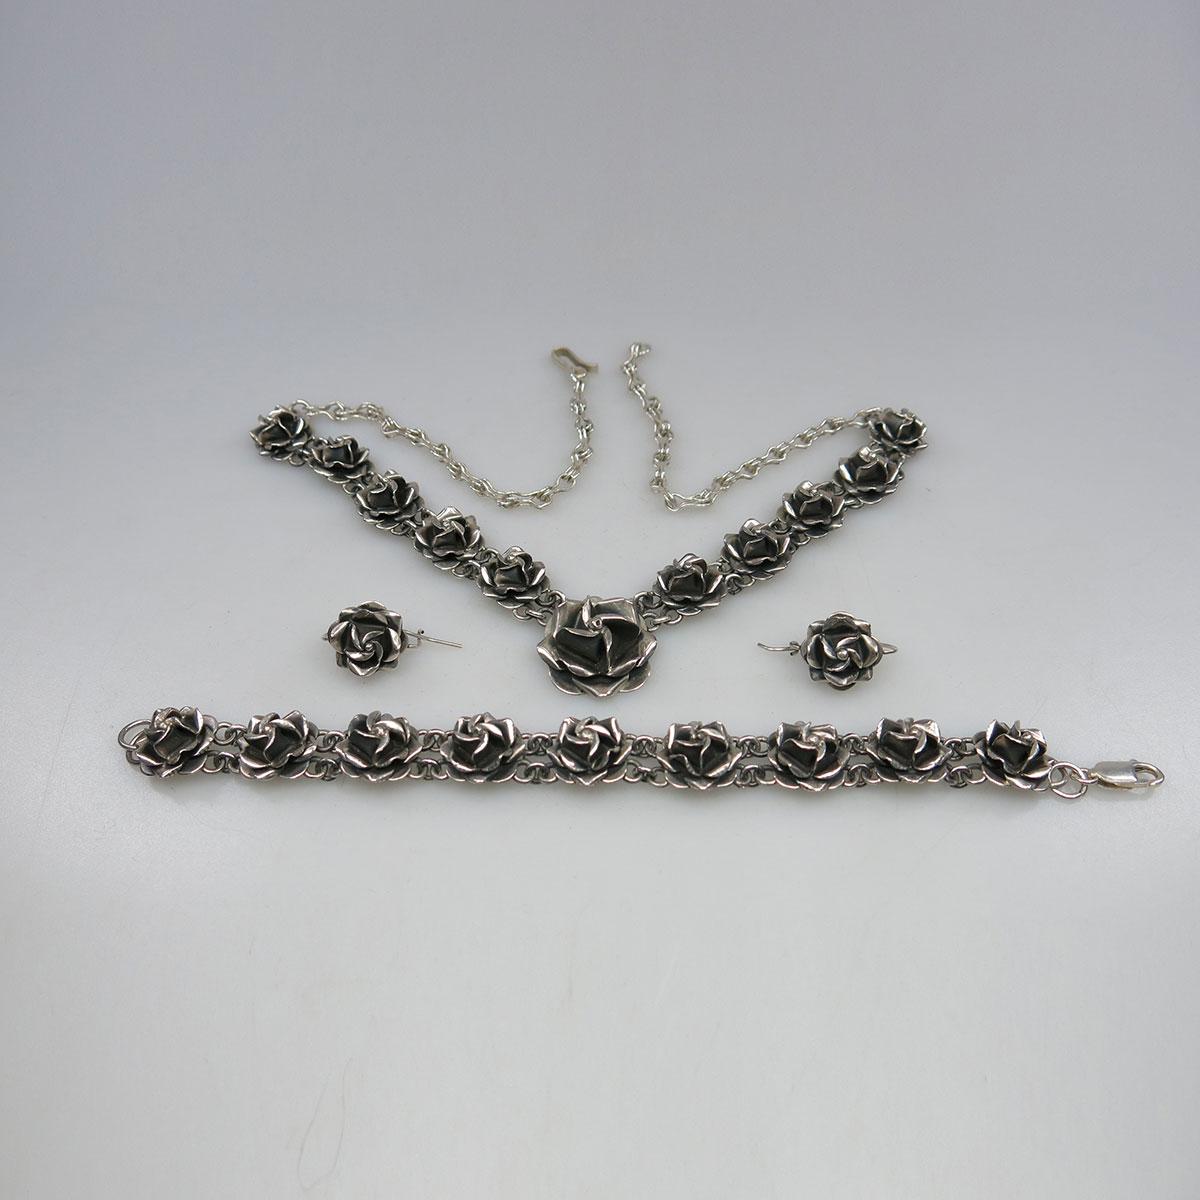 Mexican Sterling Silver Necklace, Bracelet And Earrings